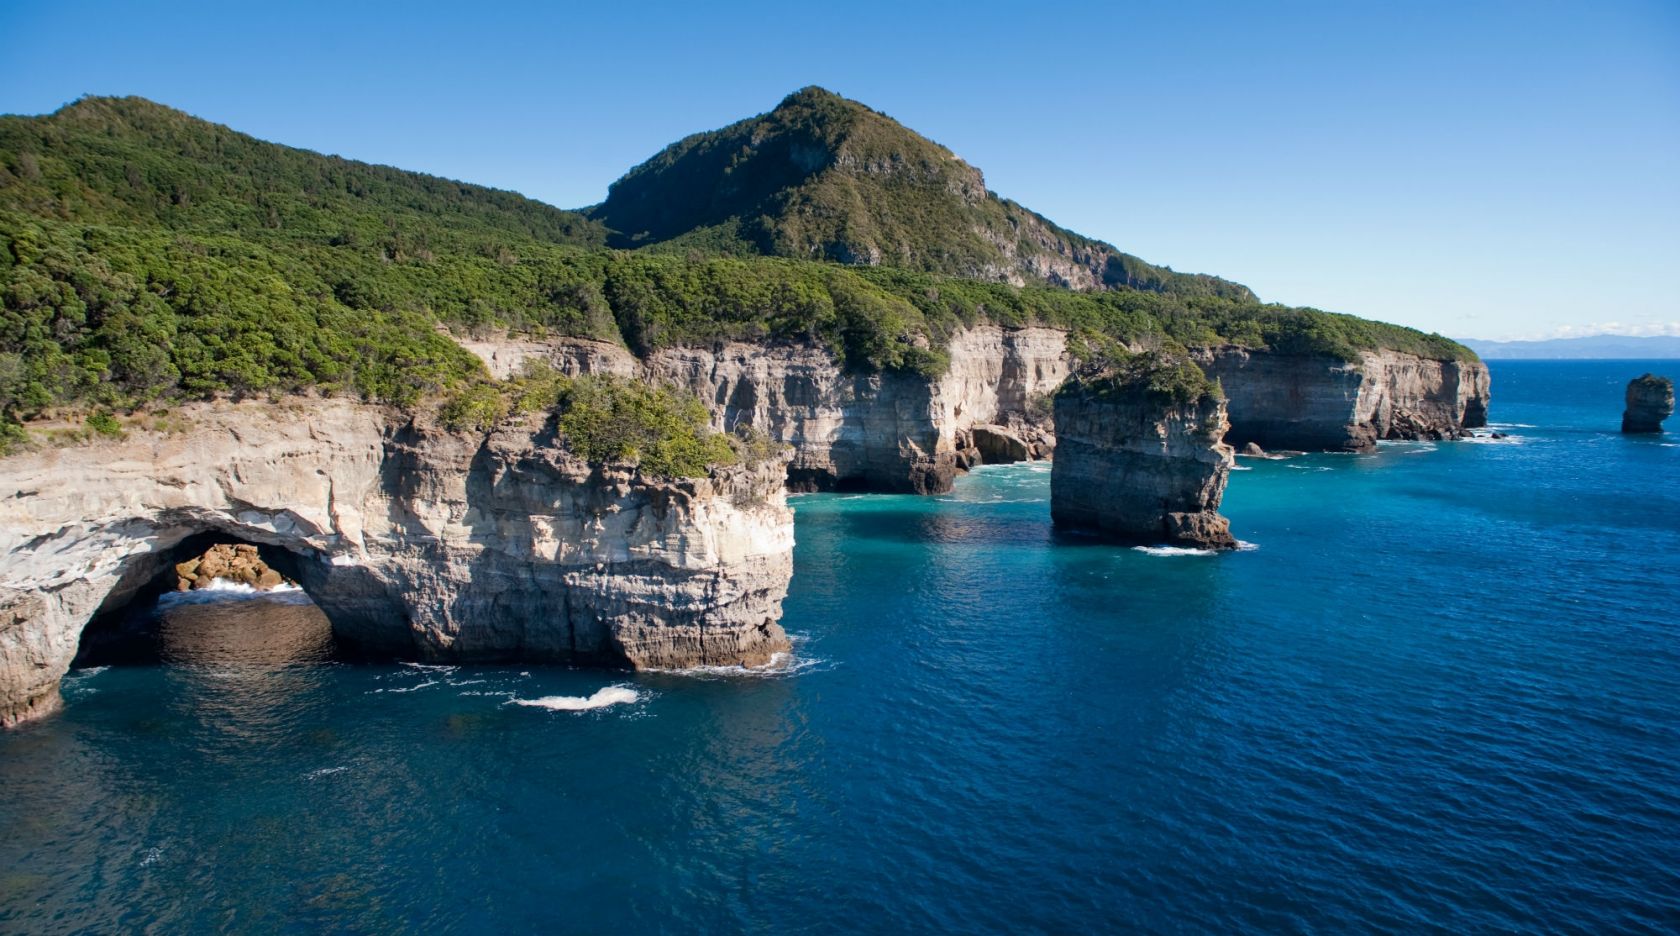 Tuhua: The Must Visit Island of The Bay Of Plenty